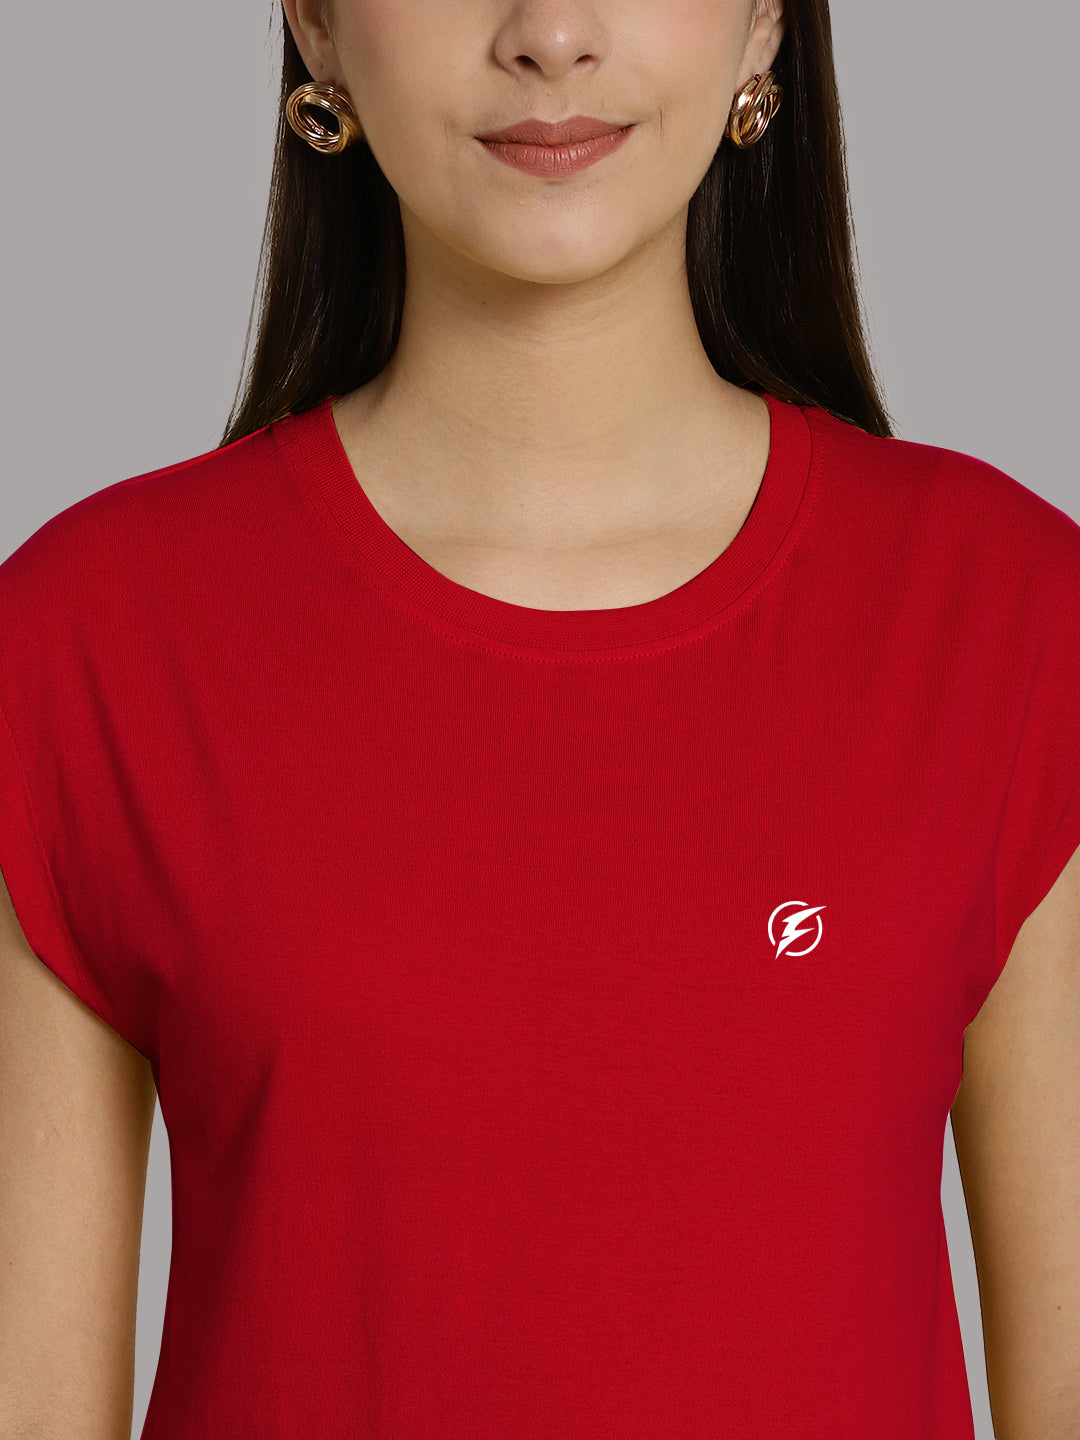 Friskers Solid Women Round Neck Extended Sleeves T-Shirt - Friskers